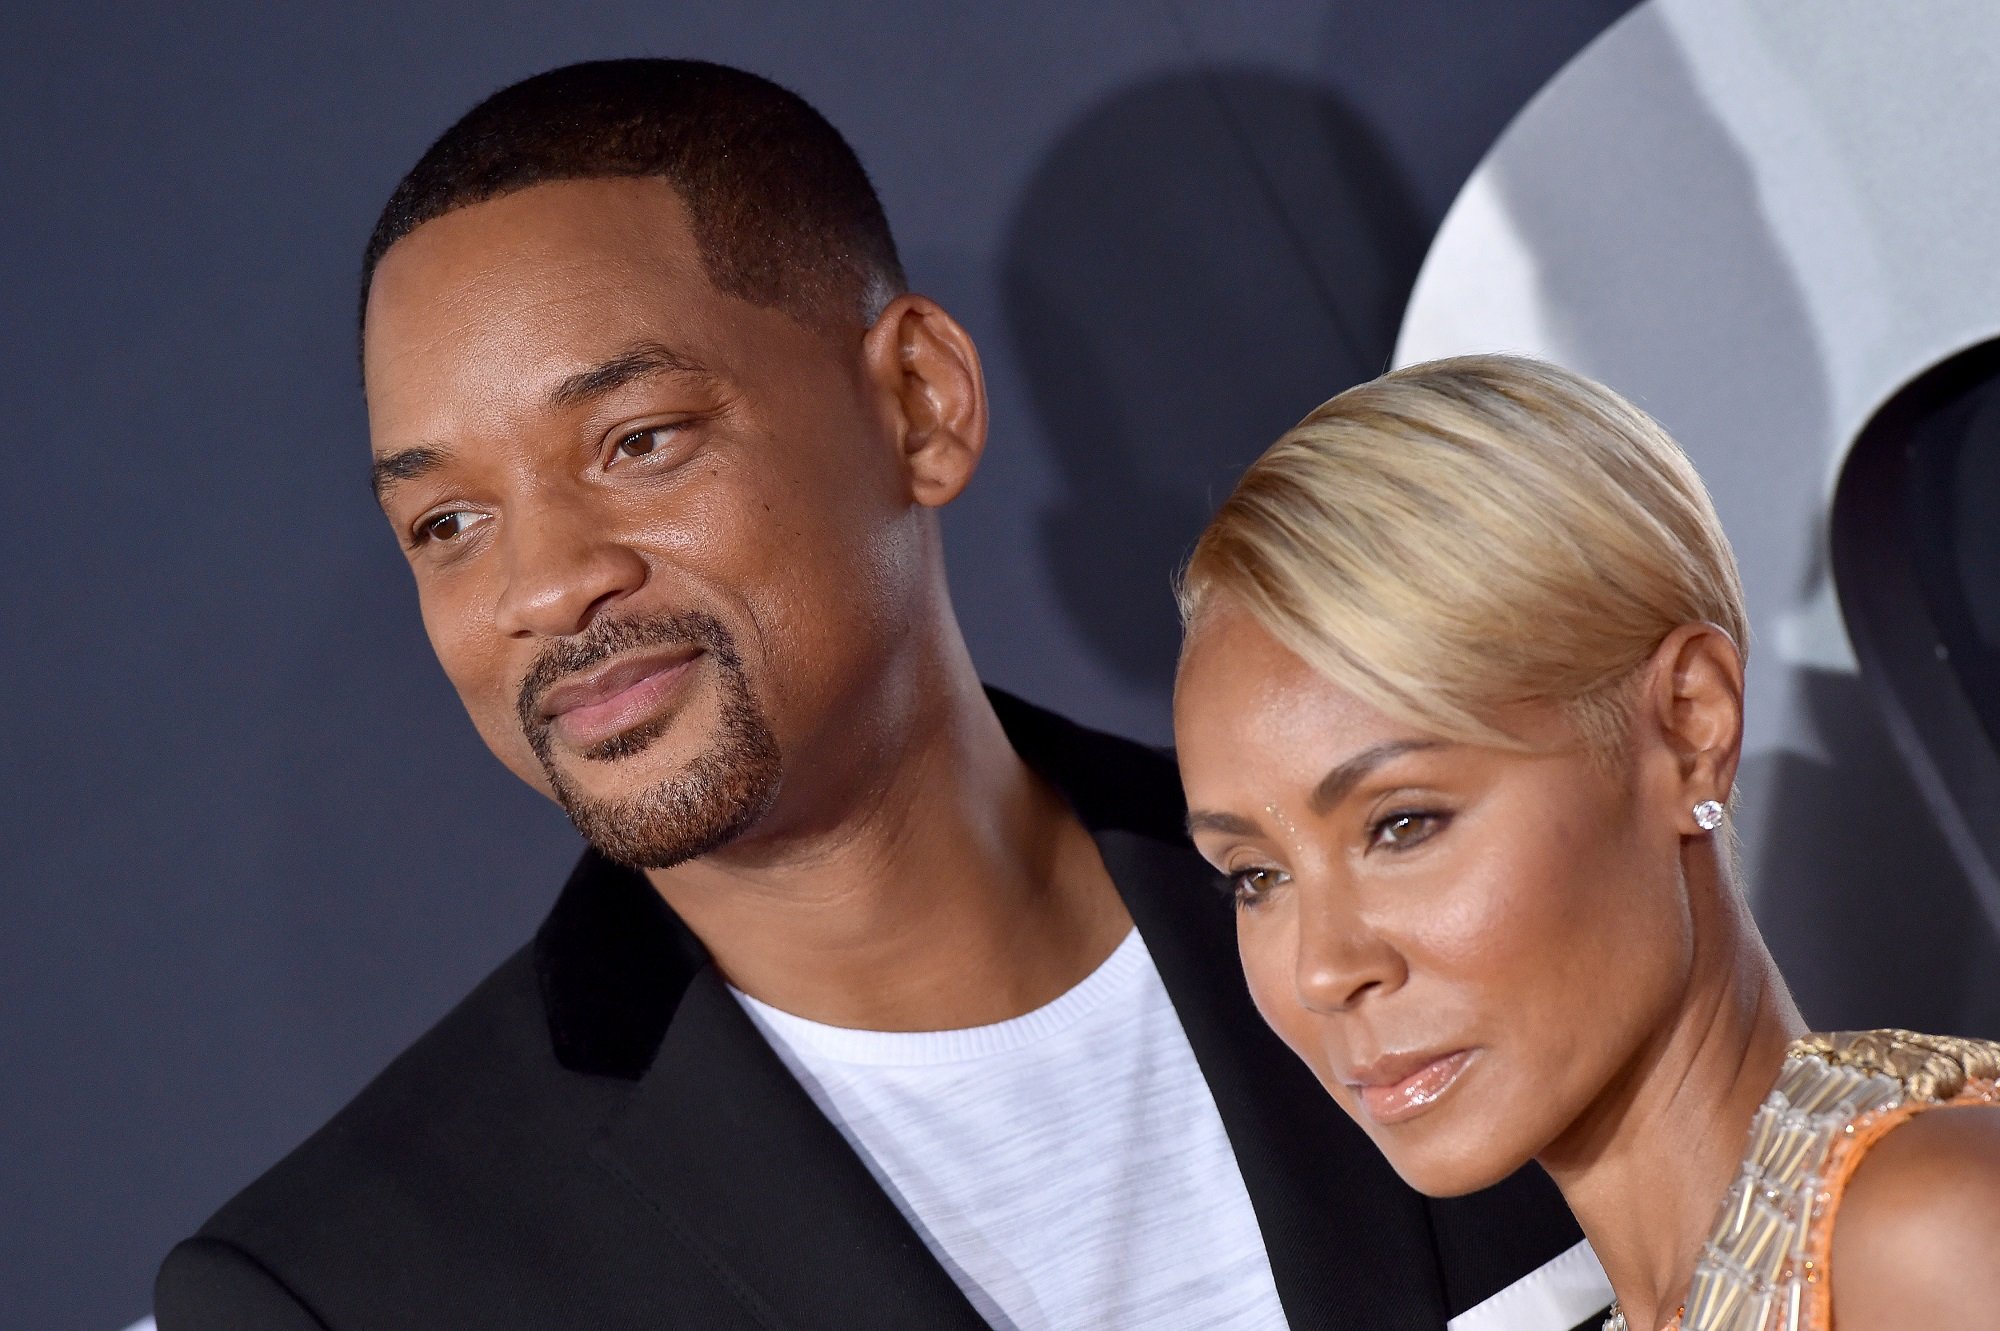 Will Smith and Jada Pinkett Smith are rumored to be Scientologists